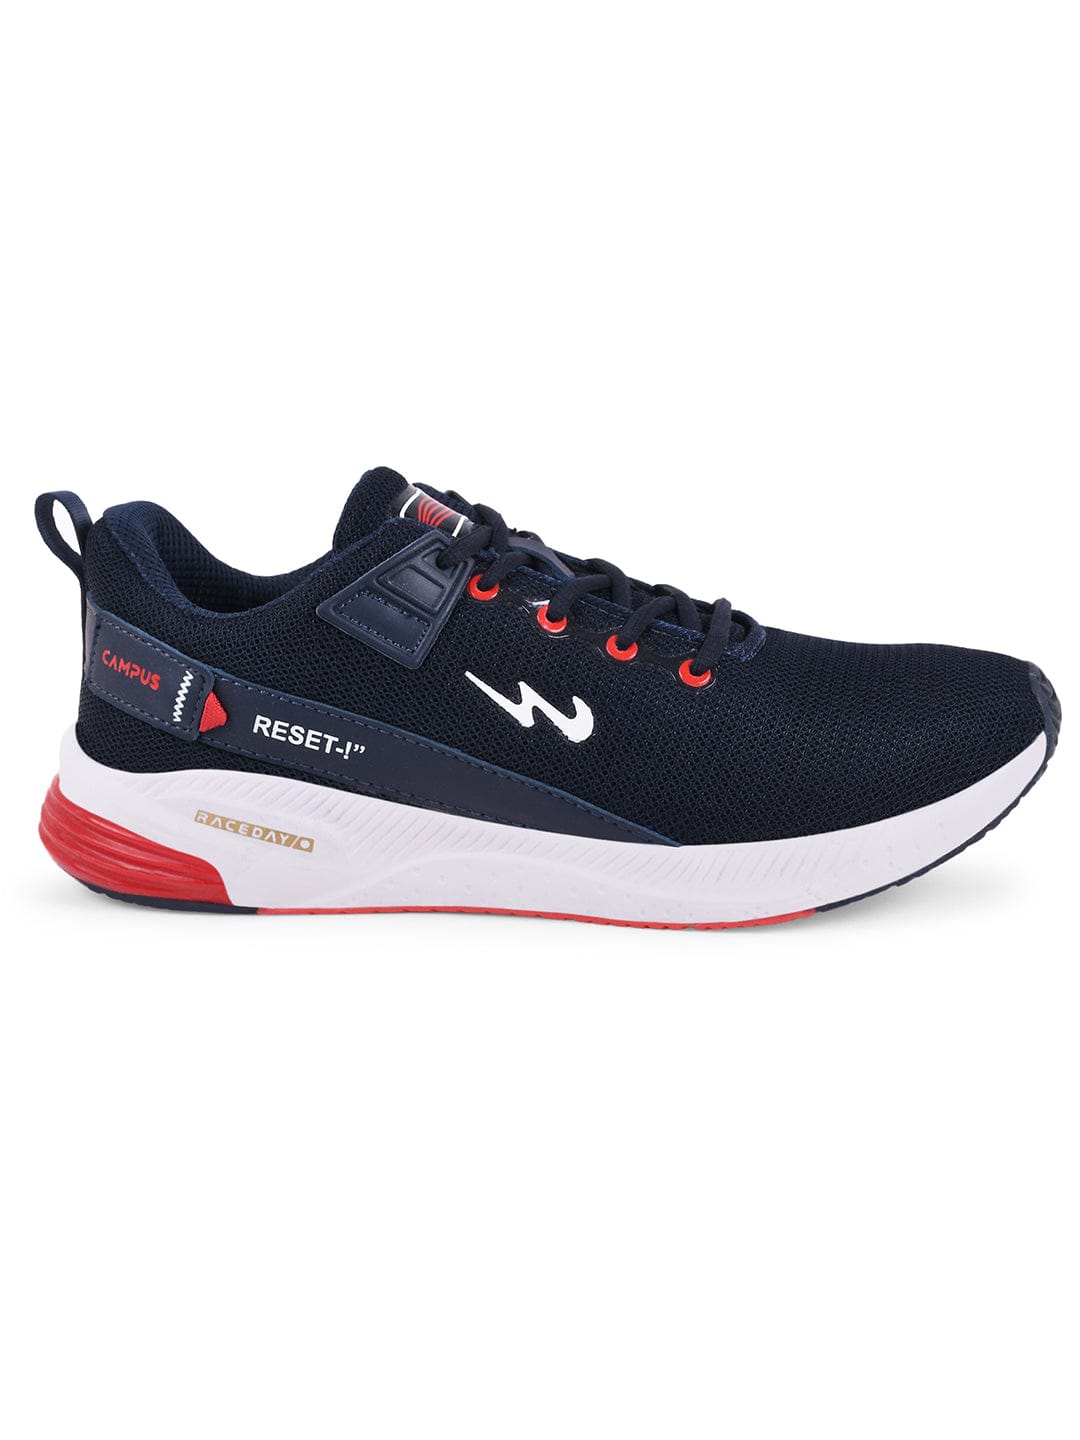 Buy REFRESH PRO Blue Men's Running Shoes online | Campus Shoes